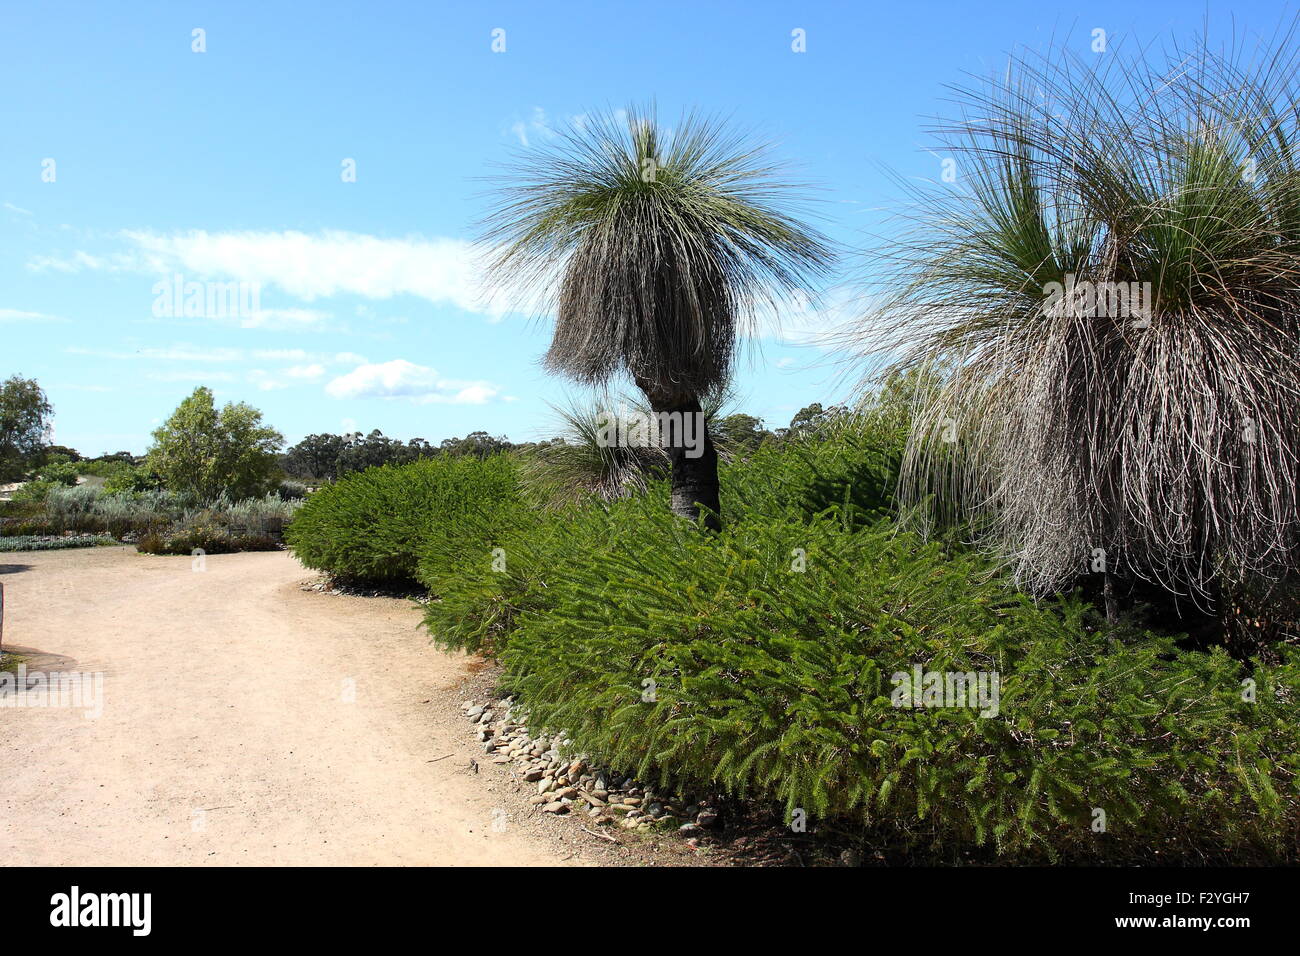 Xanthorrhoea or also known as Grass Tree Stock Photo